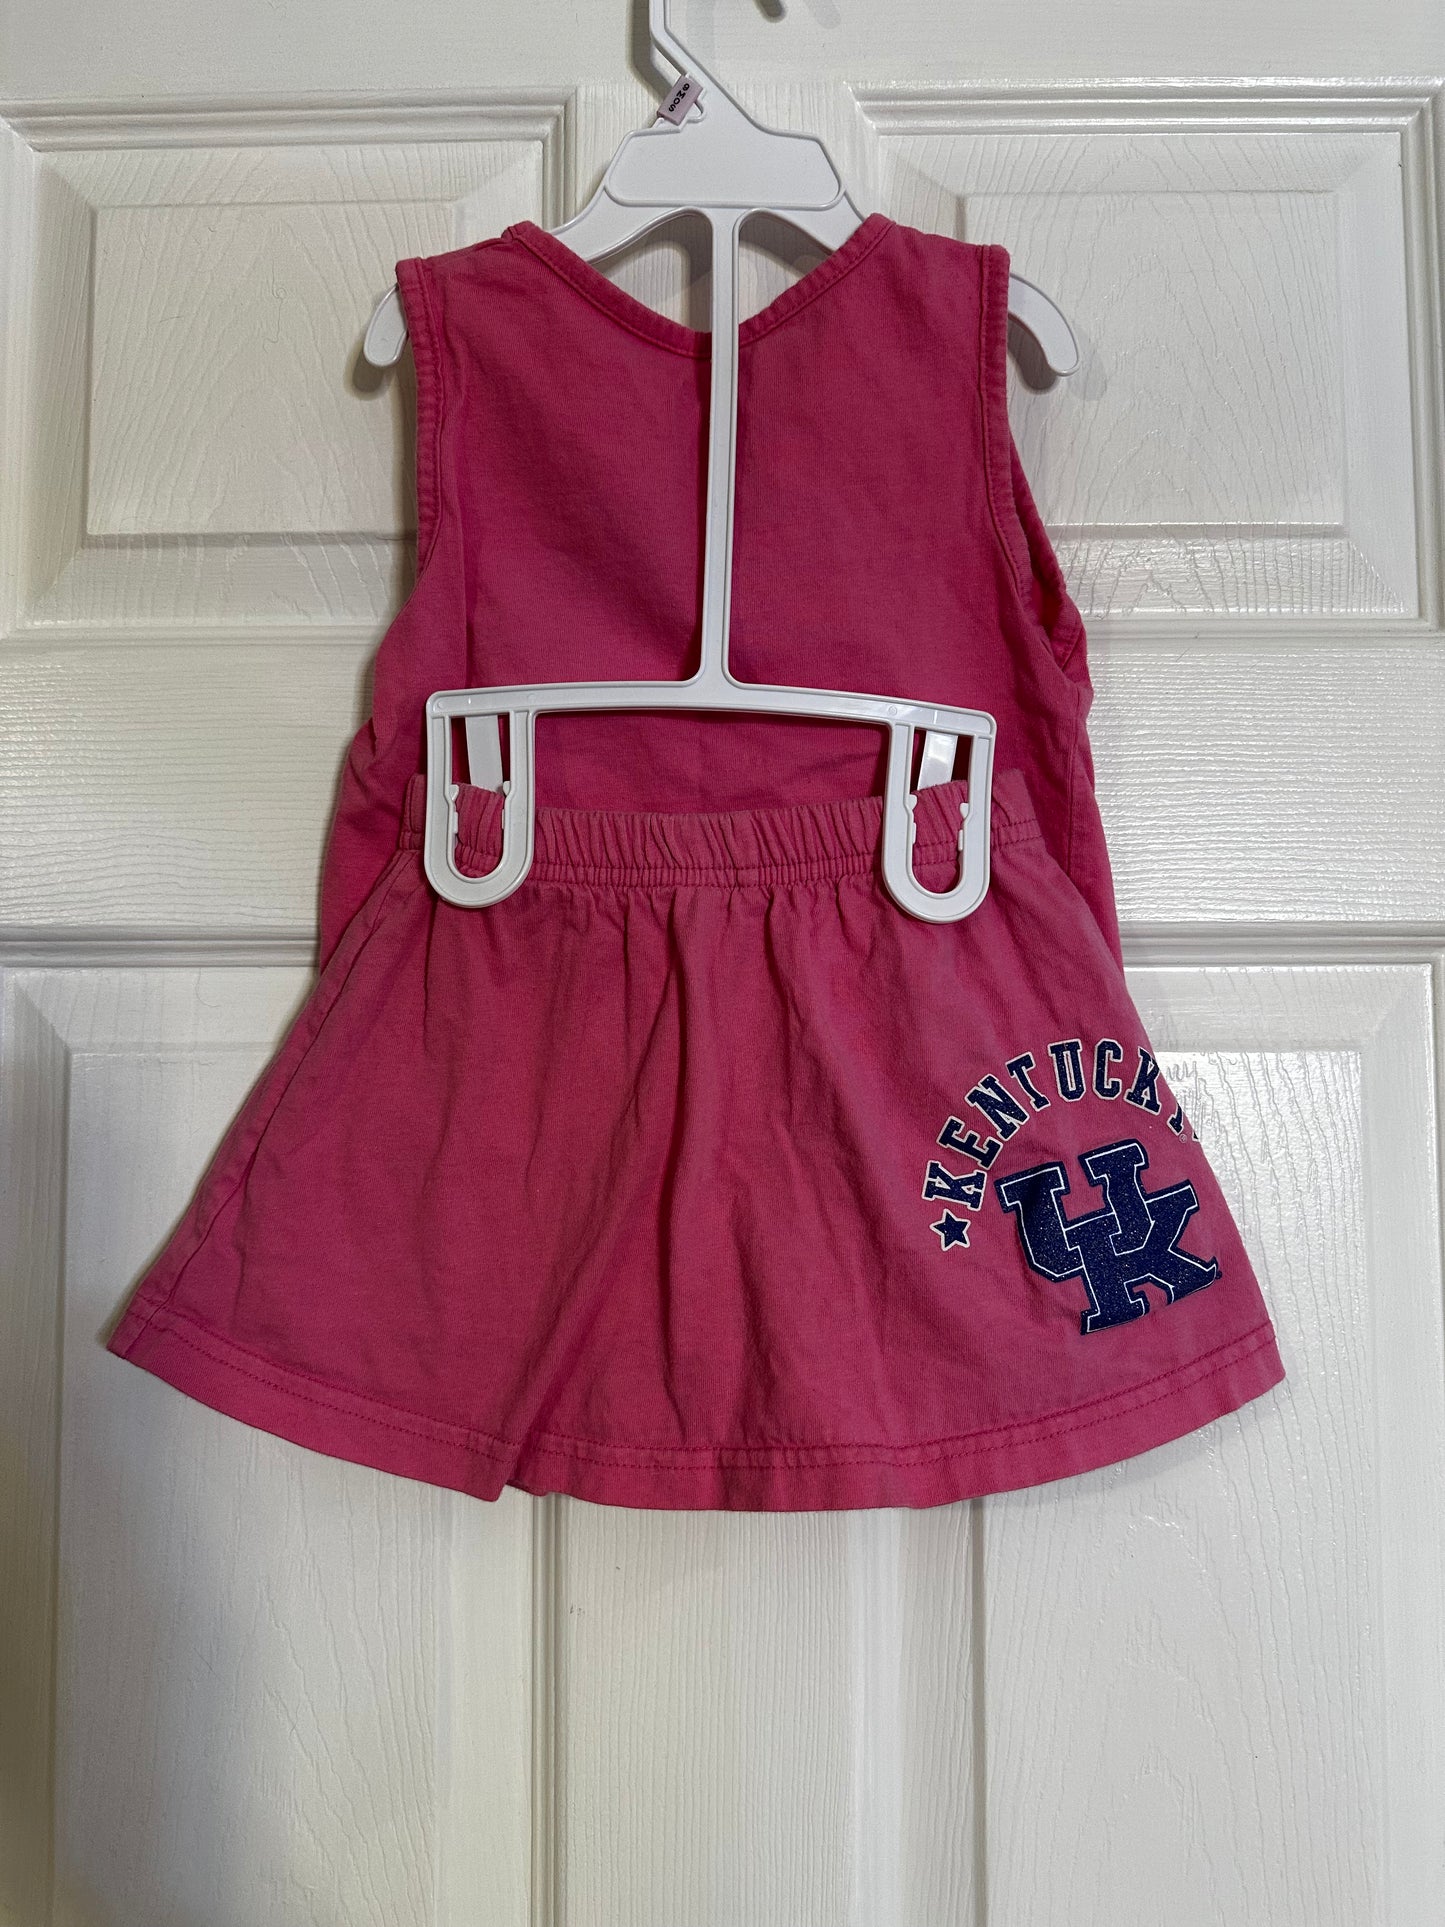 *REDUCED* 2T Girl's UK Cheer Outfit